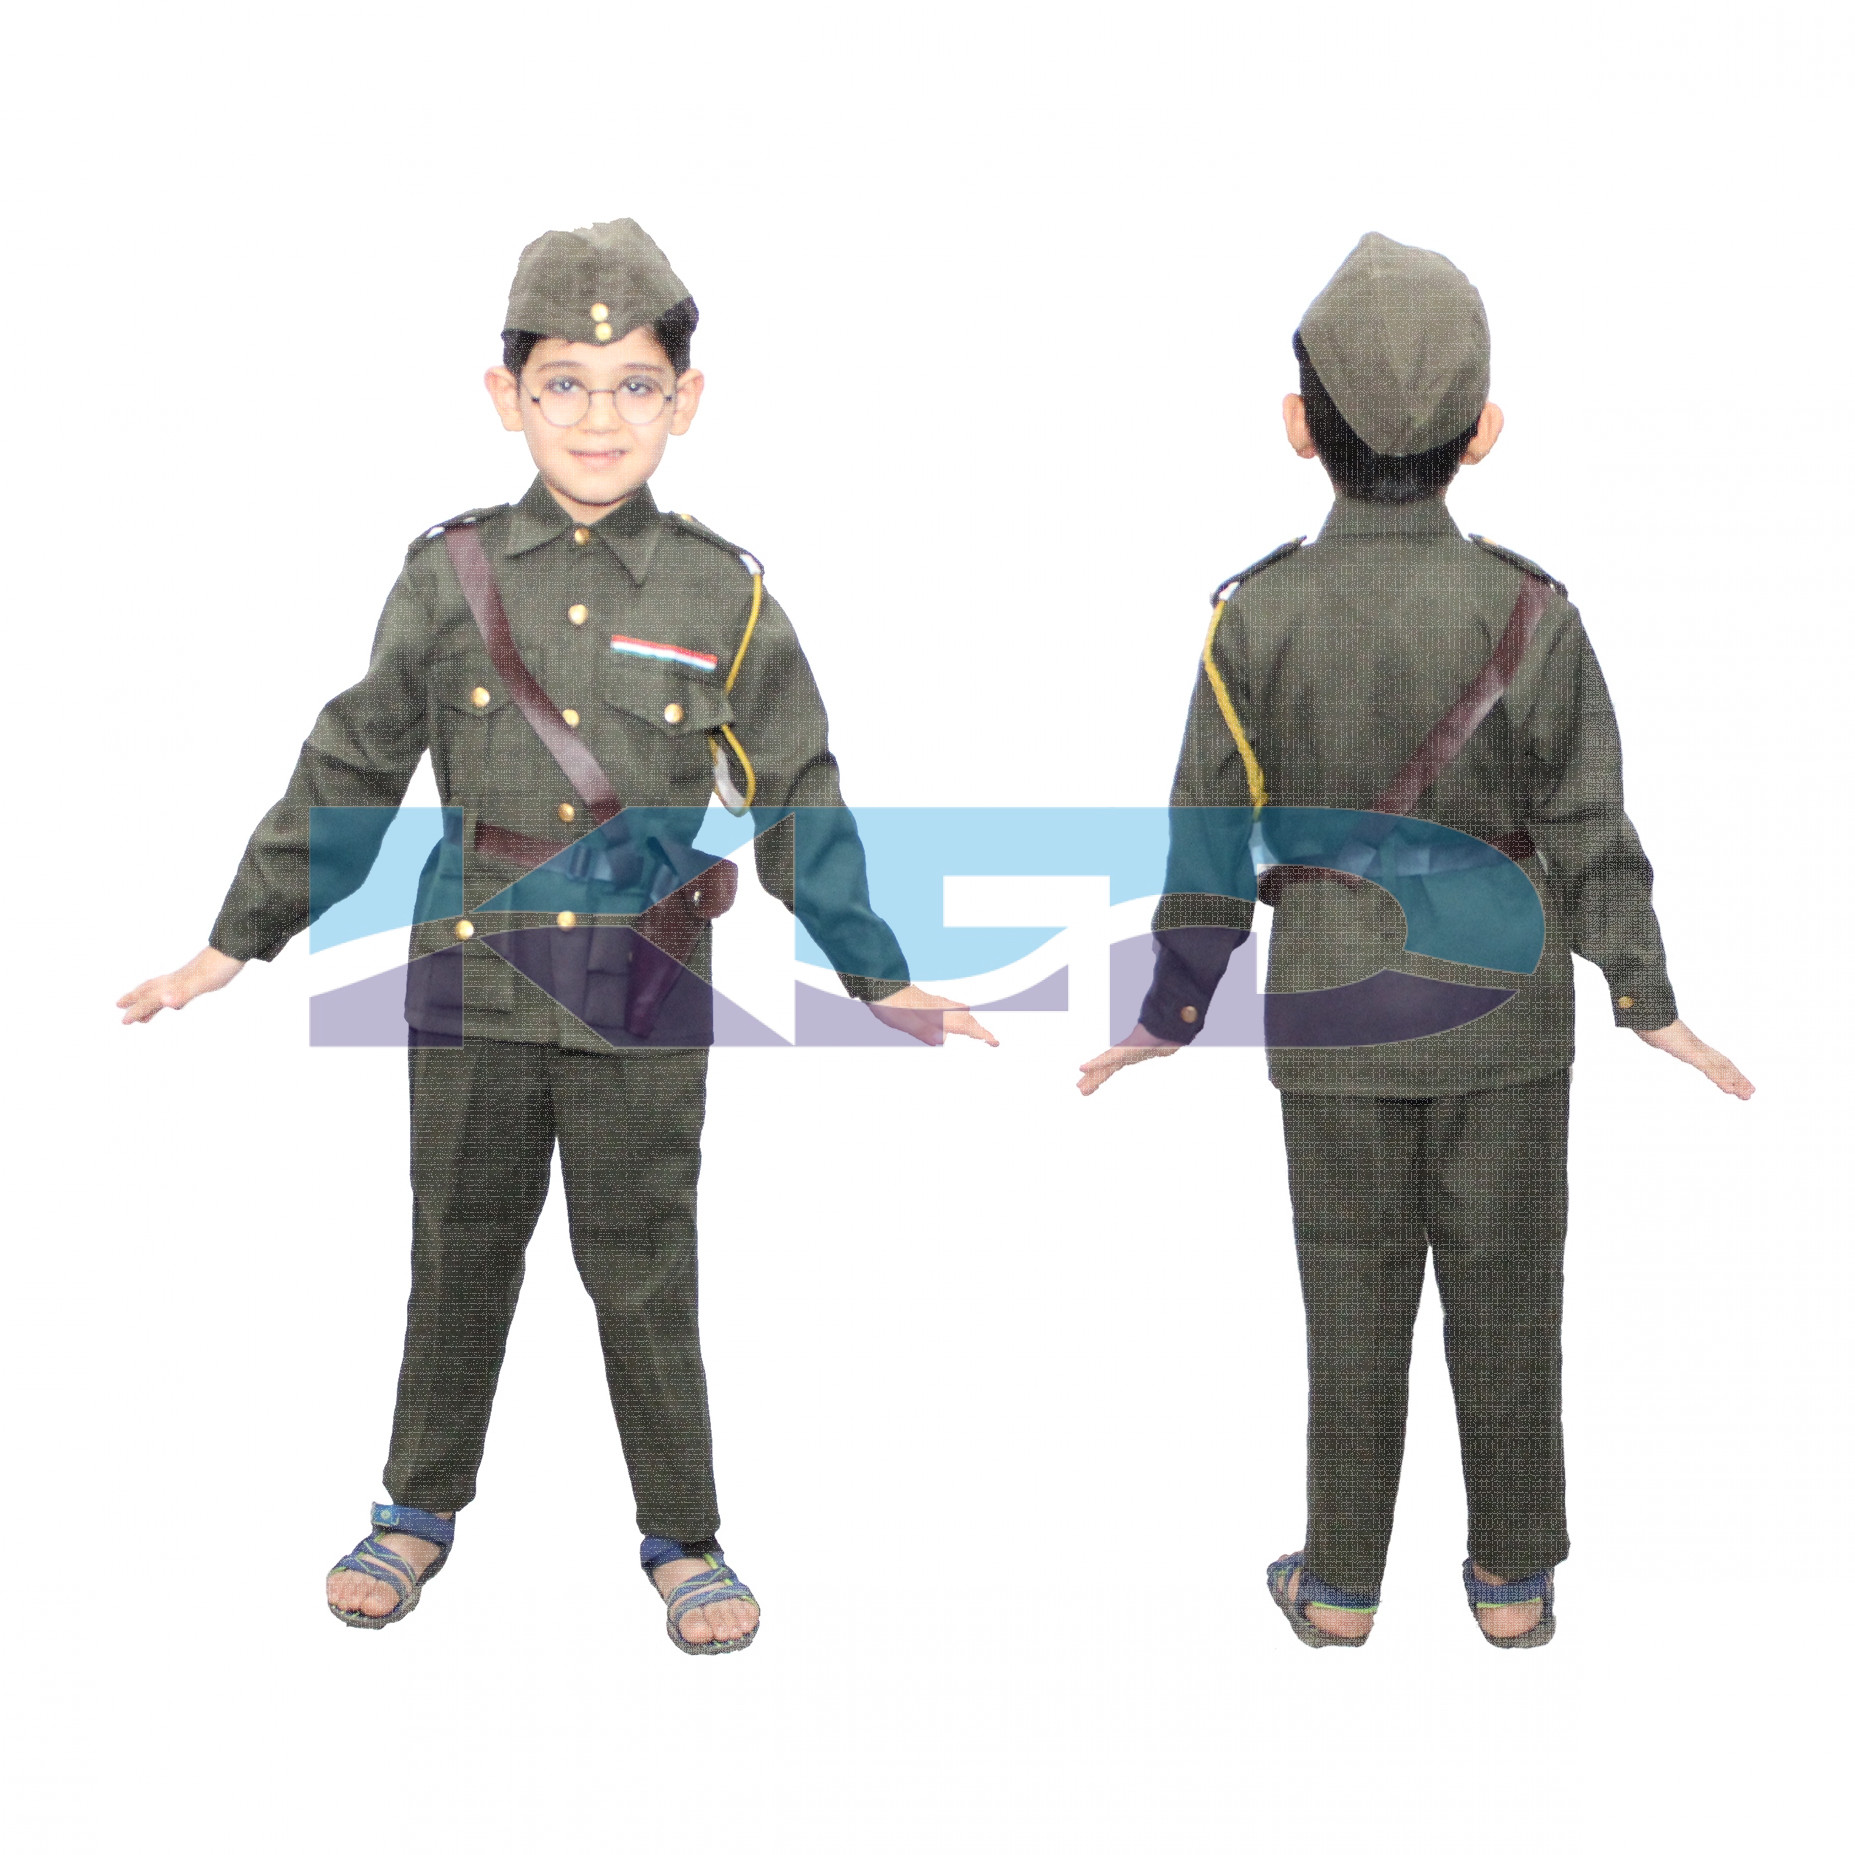 Subhash Chandar Bose National Hero/freedom figter Costume For Kids independence Day/Republic Day/Annual function/Theme party/Competition/Stage Shows Dress